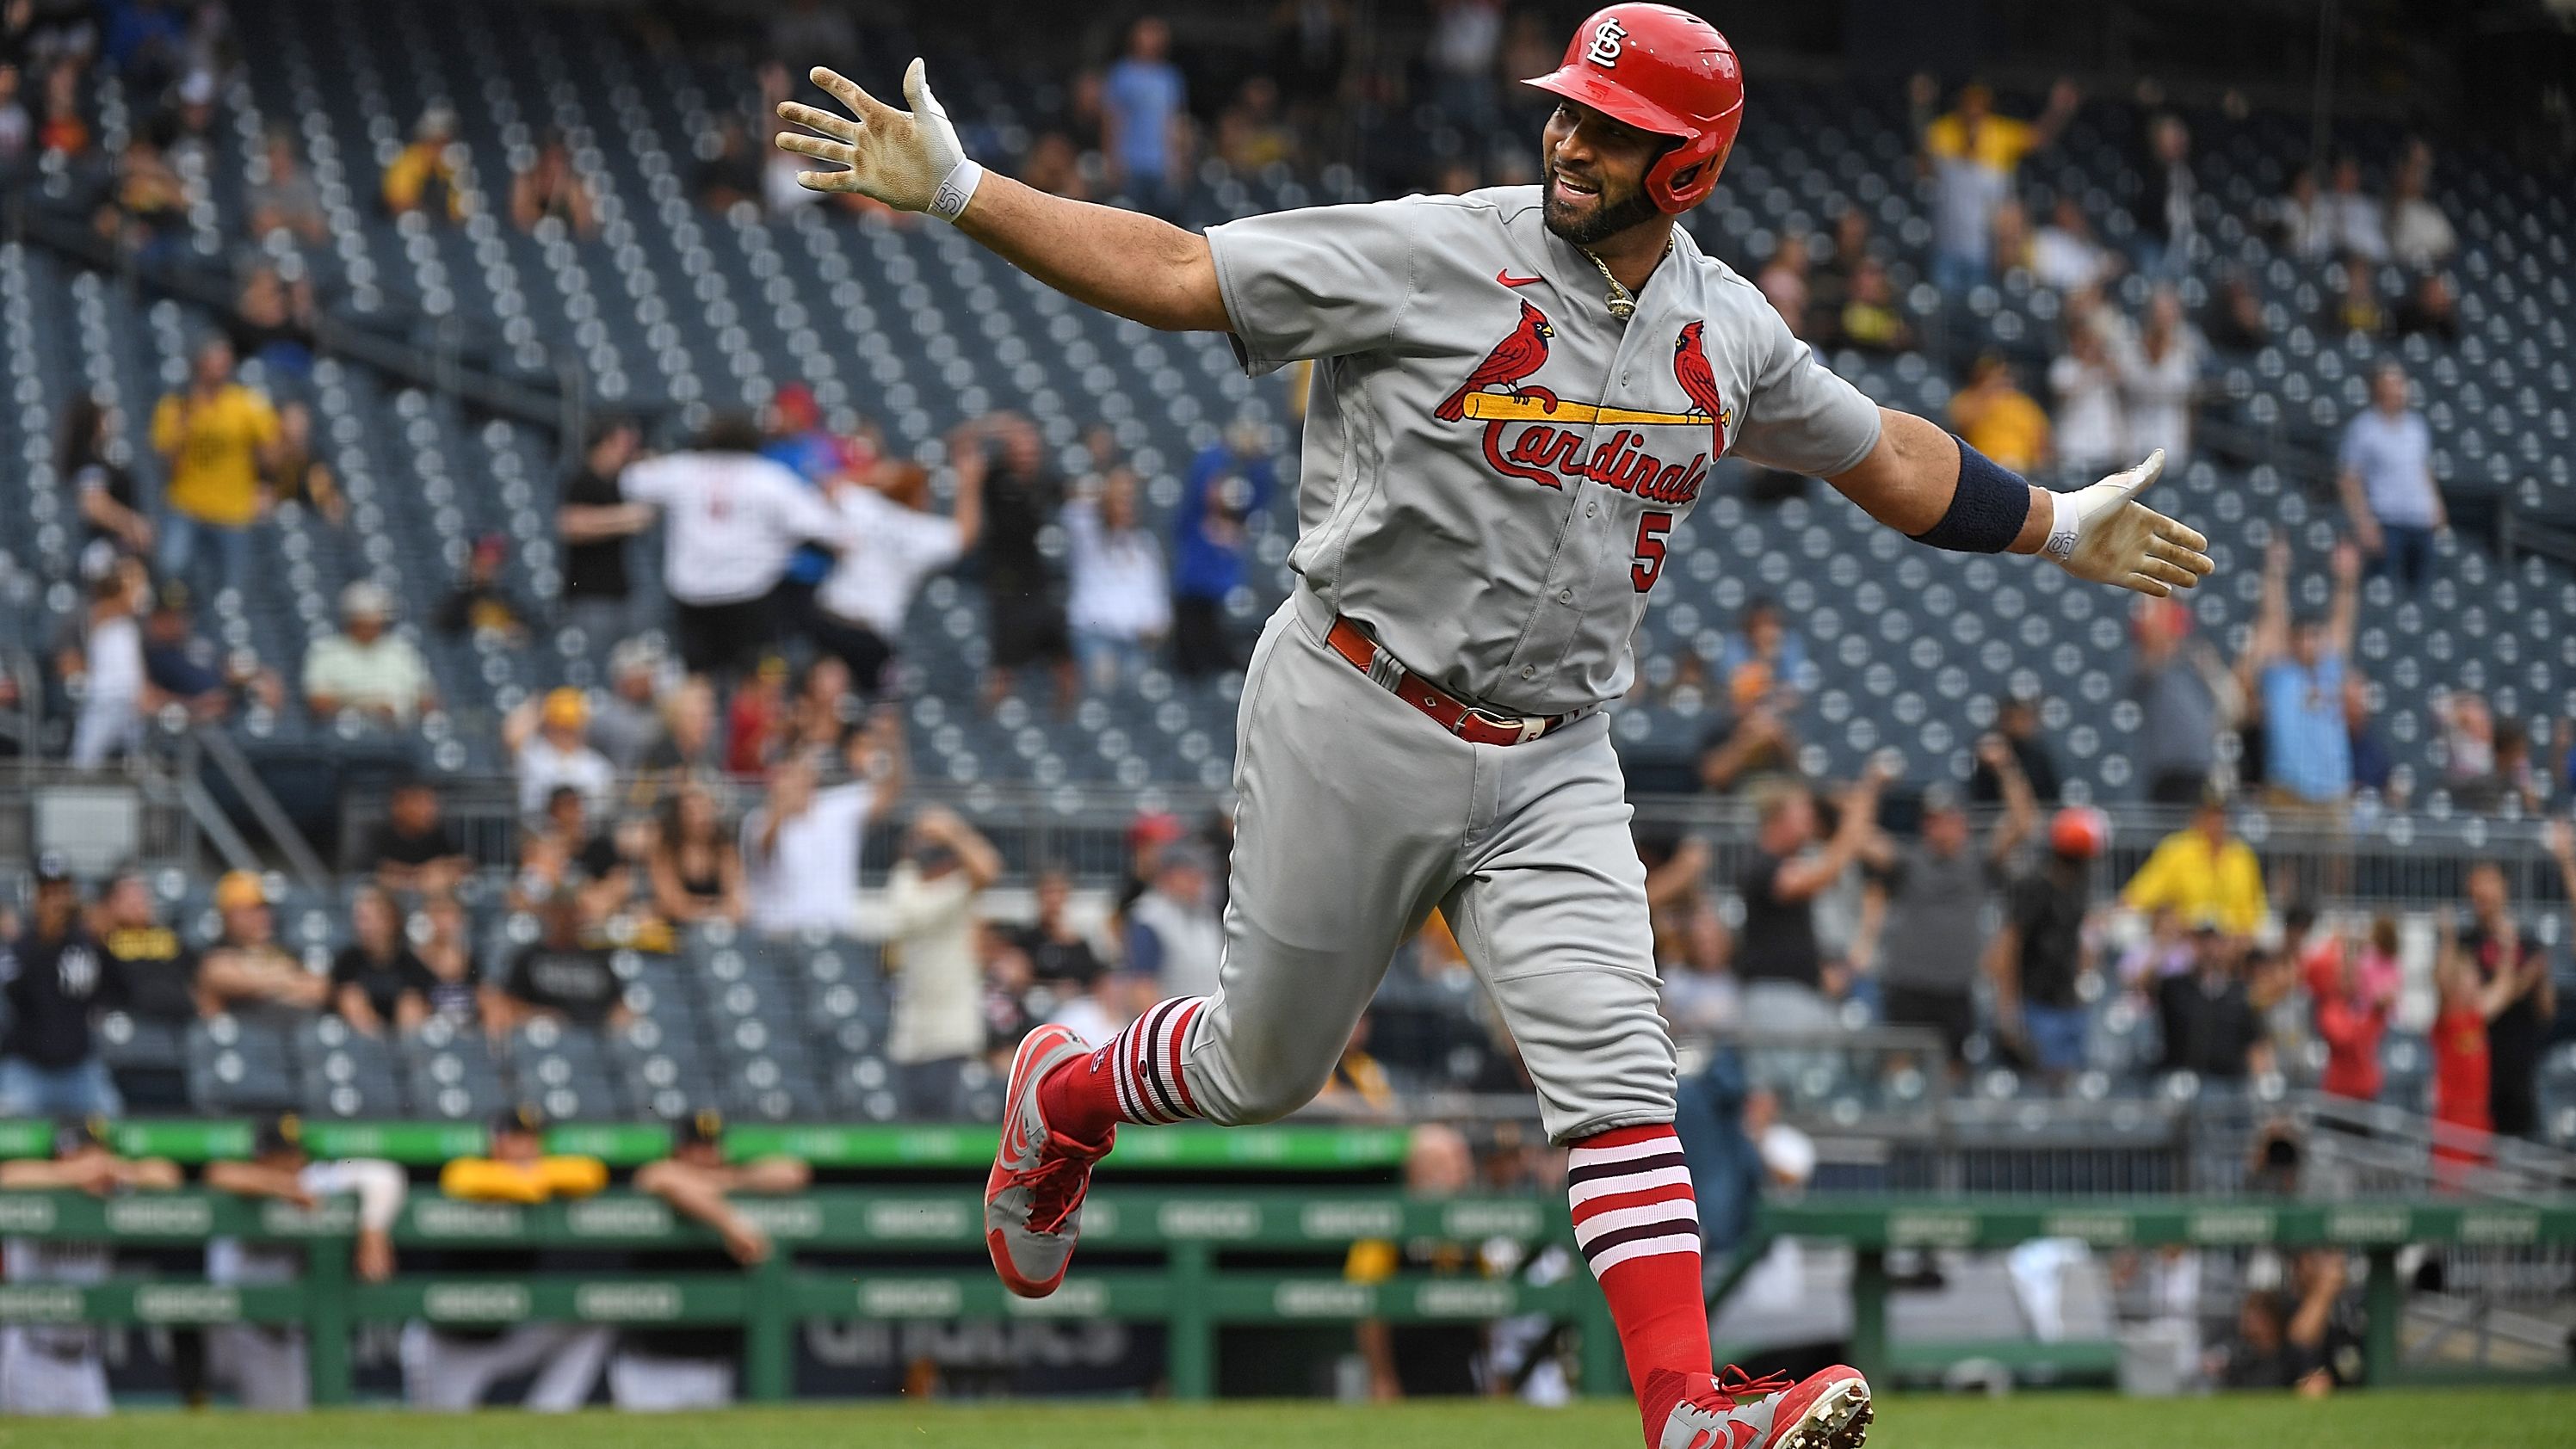 Pujols hit a clutch two-run HR at the top of the ninth to turn the game around for the Cardinals.